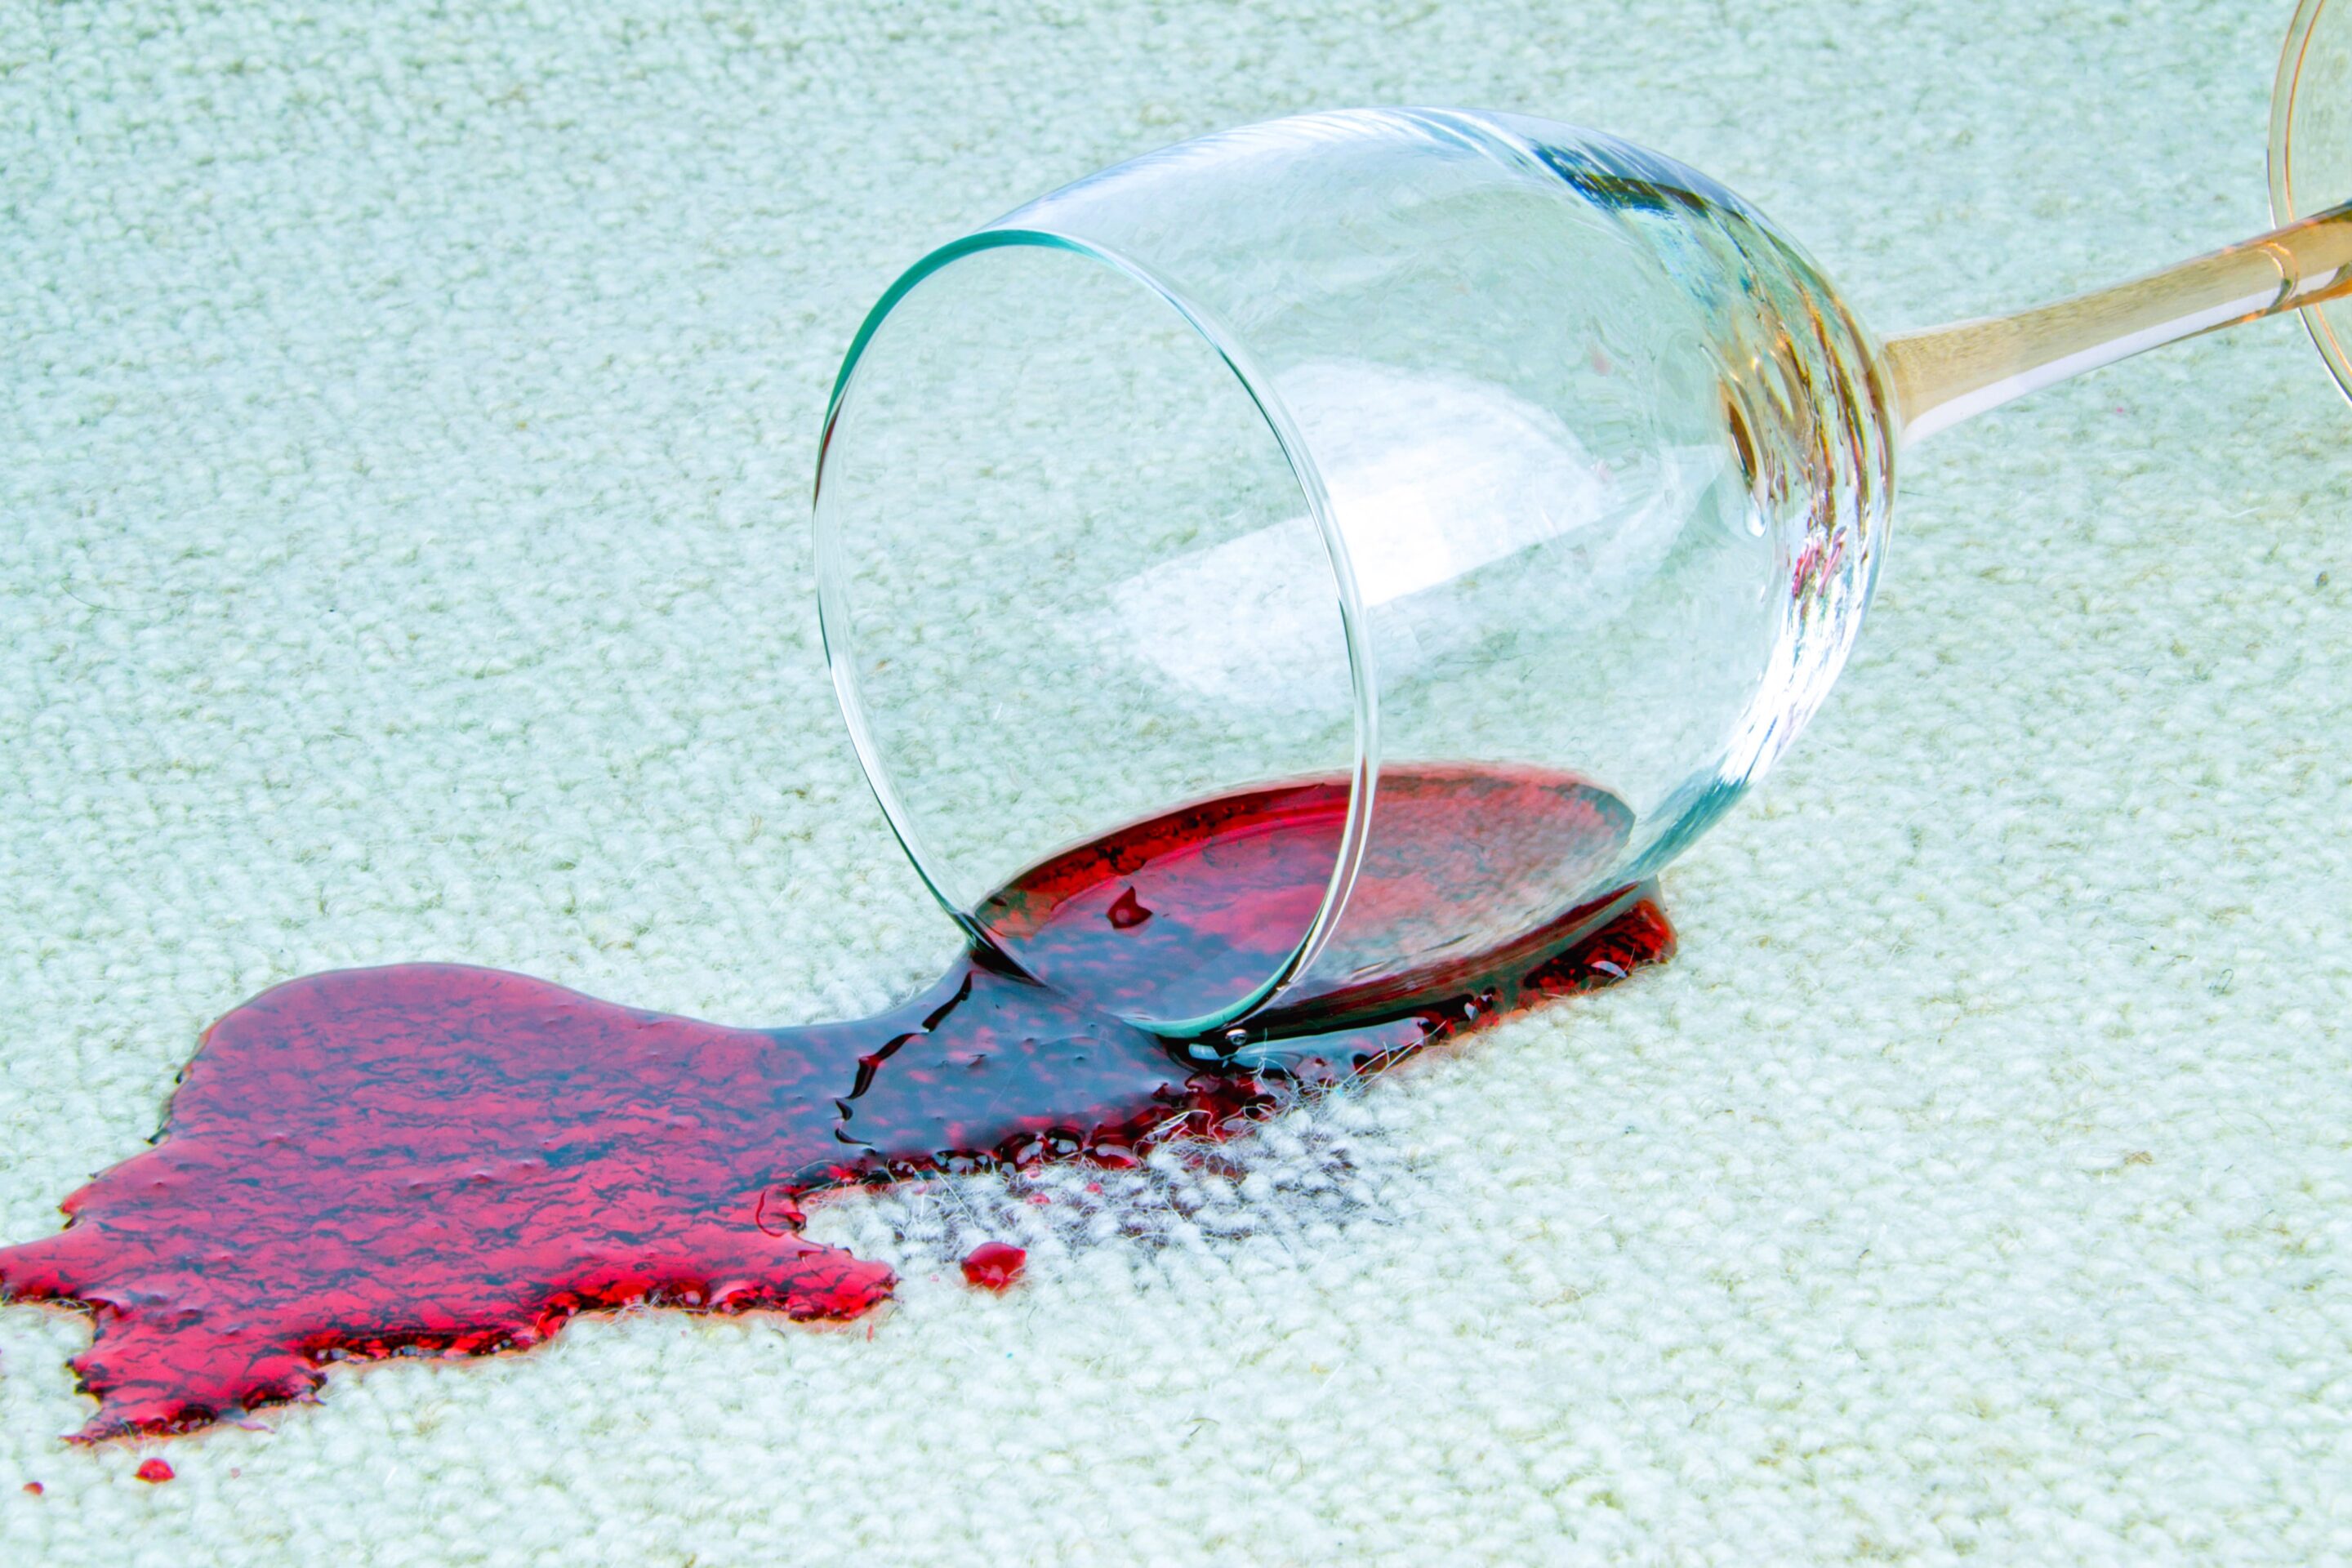 10 Effective Ways to Clean Carpet Stains